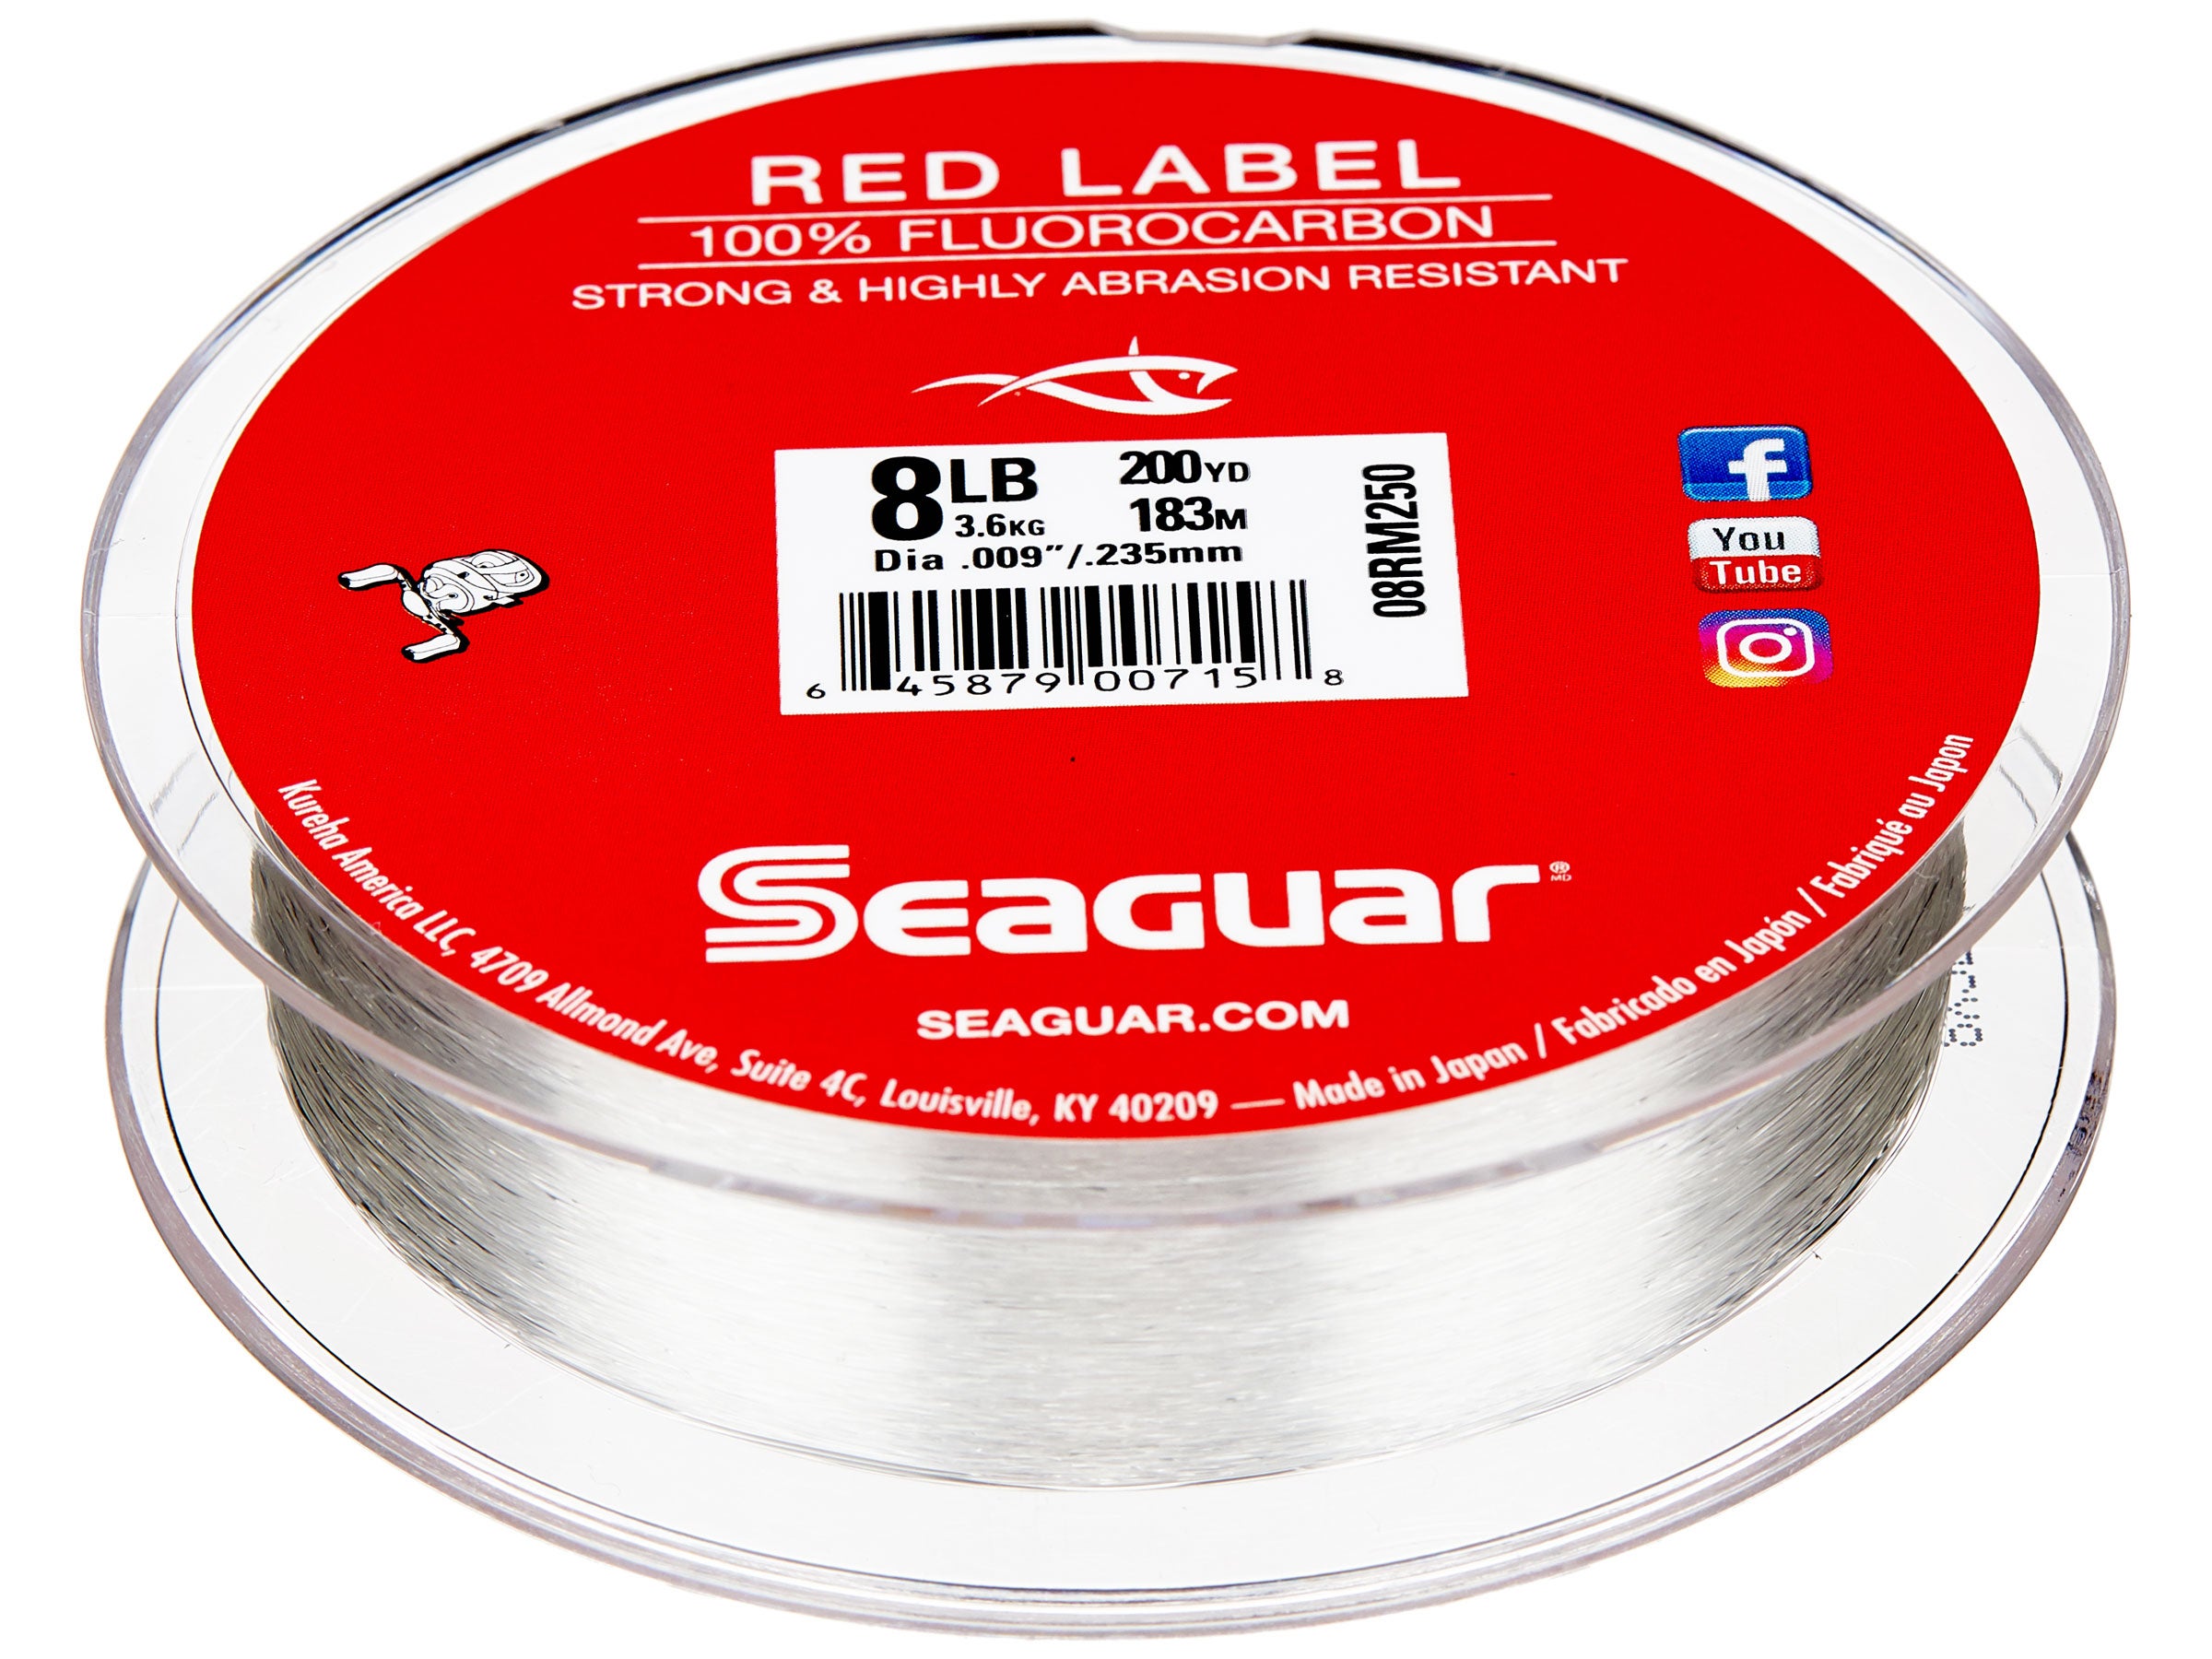 Seaguar Red Label Fluorocarbon Leader Clear Fishing Line 25 Yards Select LB Test 